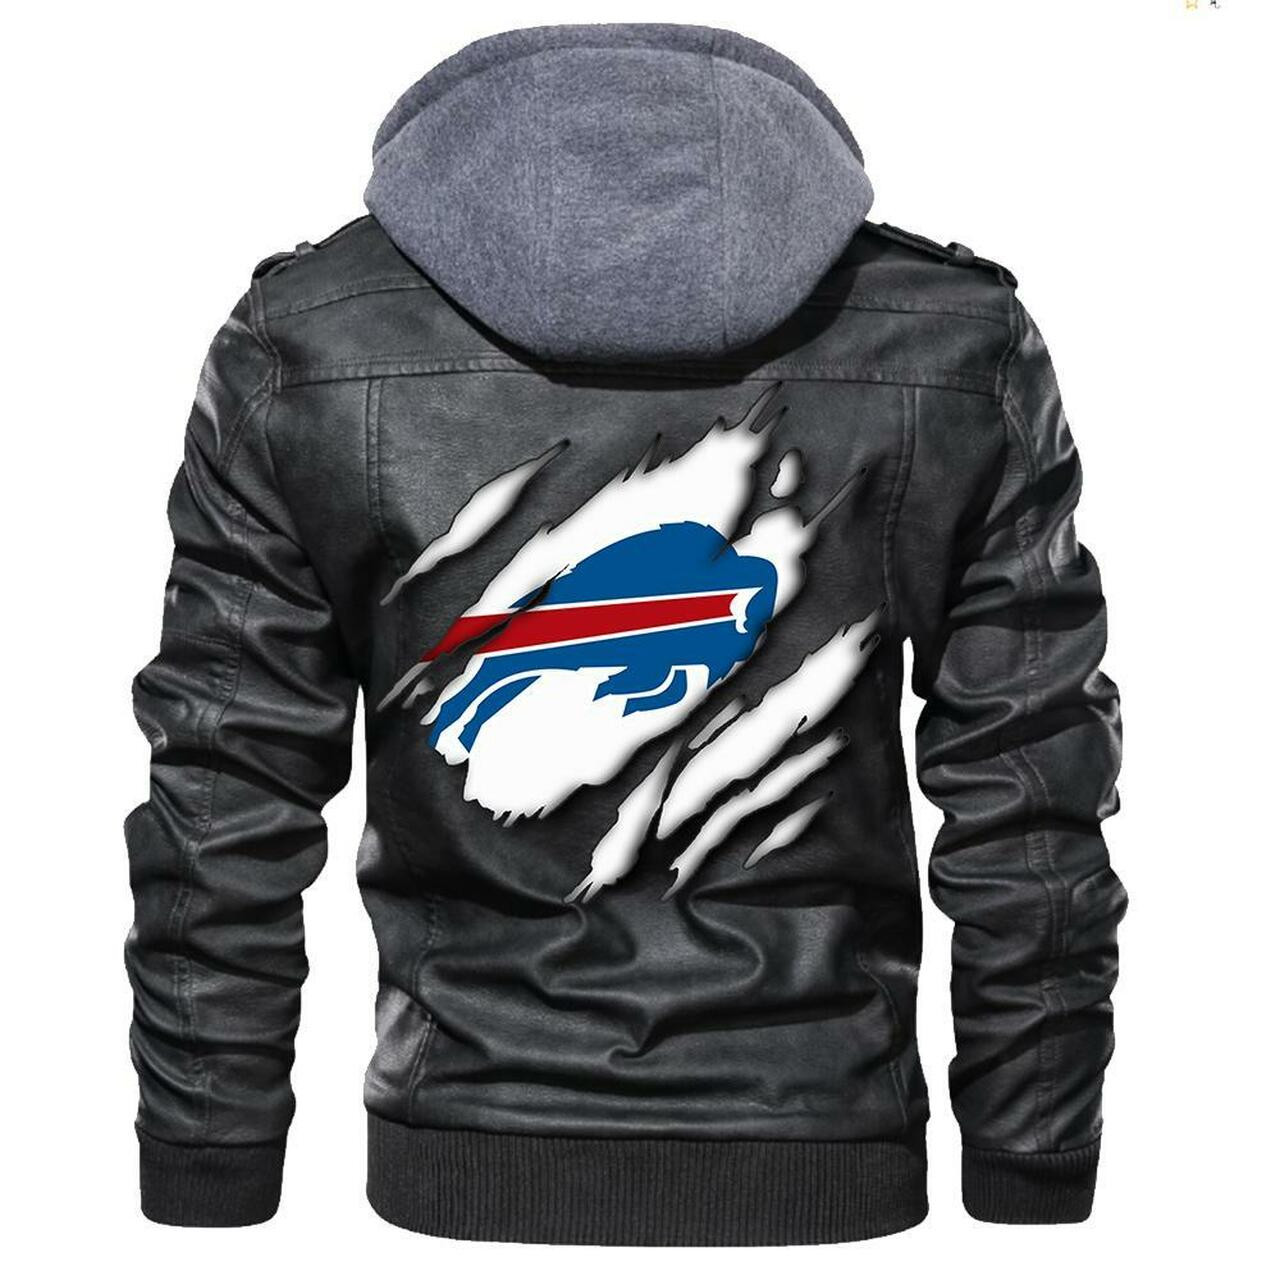 This leather Jacket will look great on you and make you stand out from the crowd 287